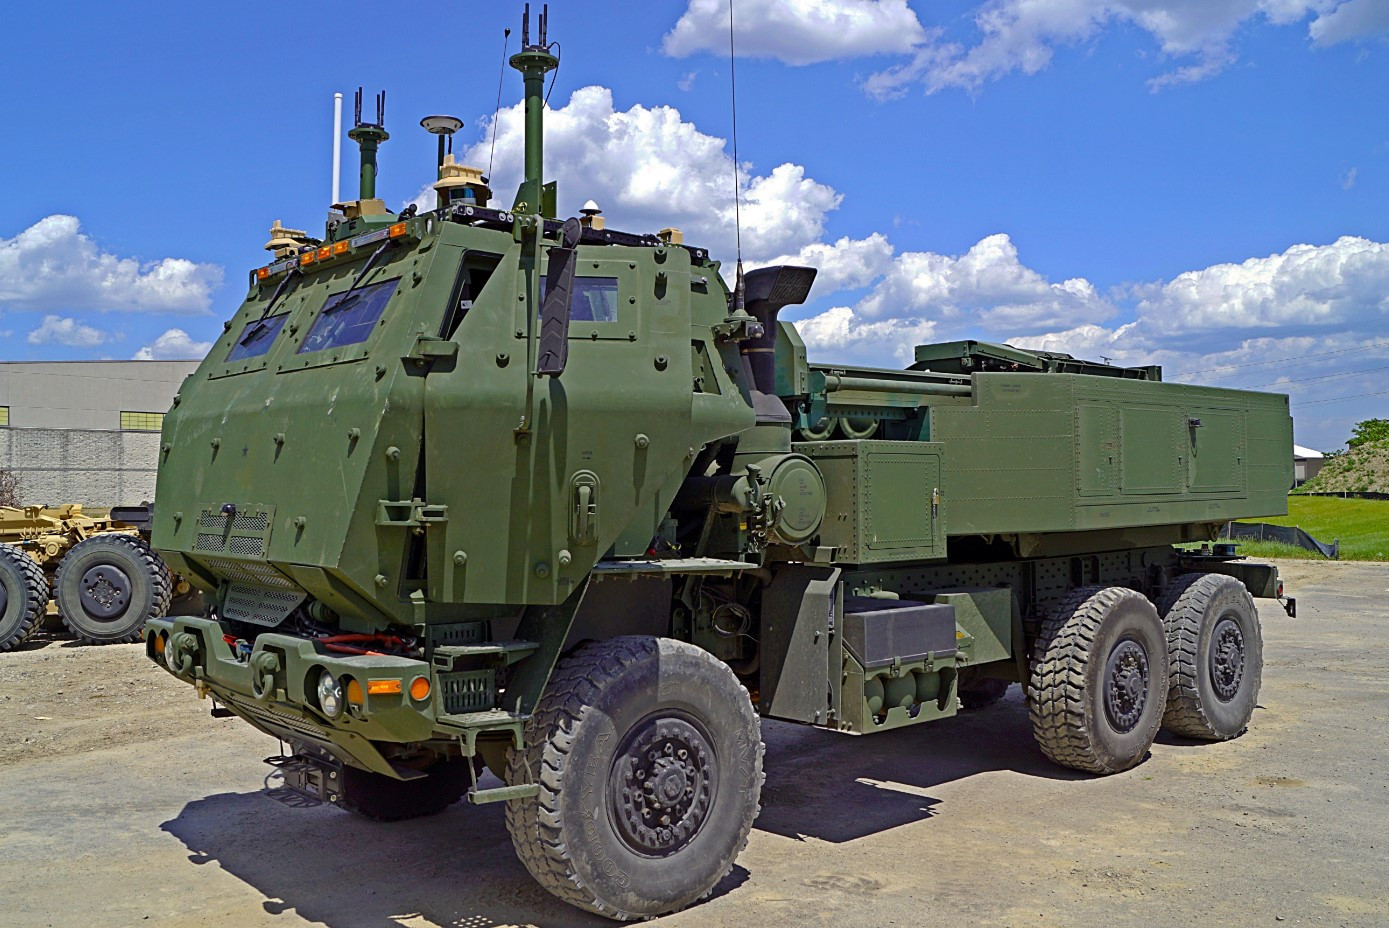 What appears to be a modified M142 HIMARS launch vehicle used in earlier AML testing. <em>US Army</em>